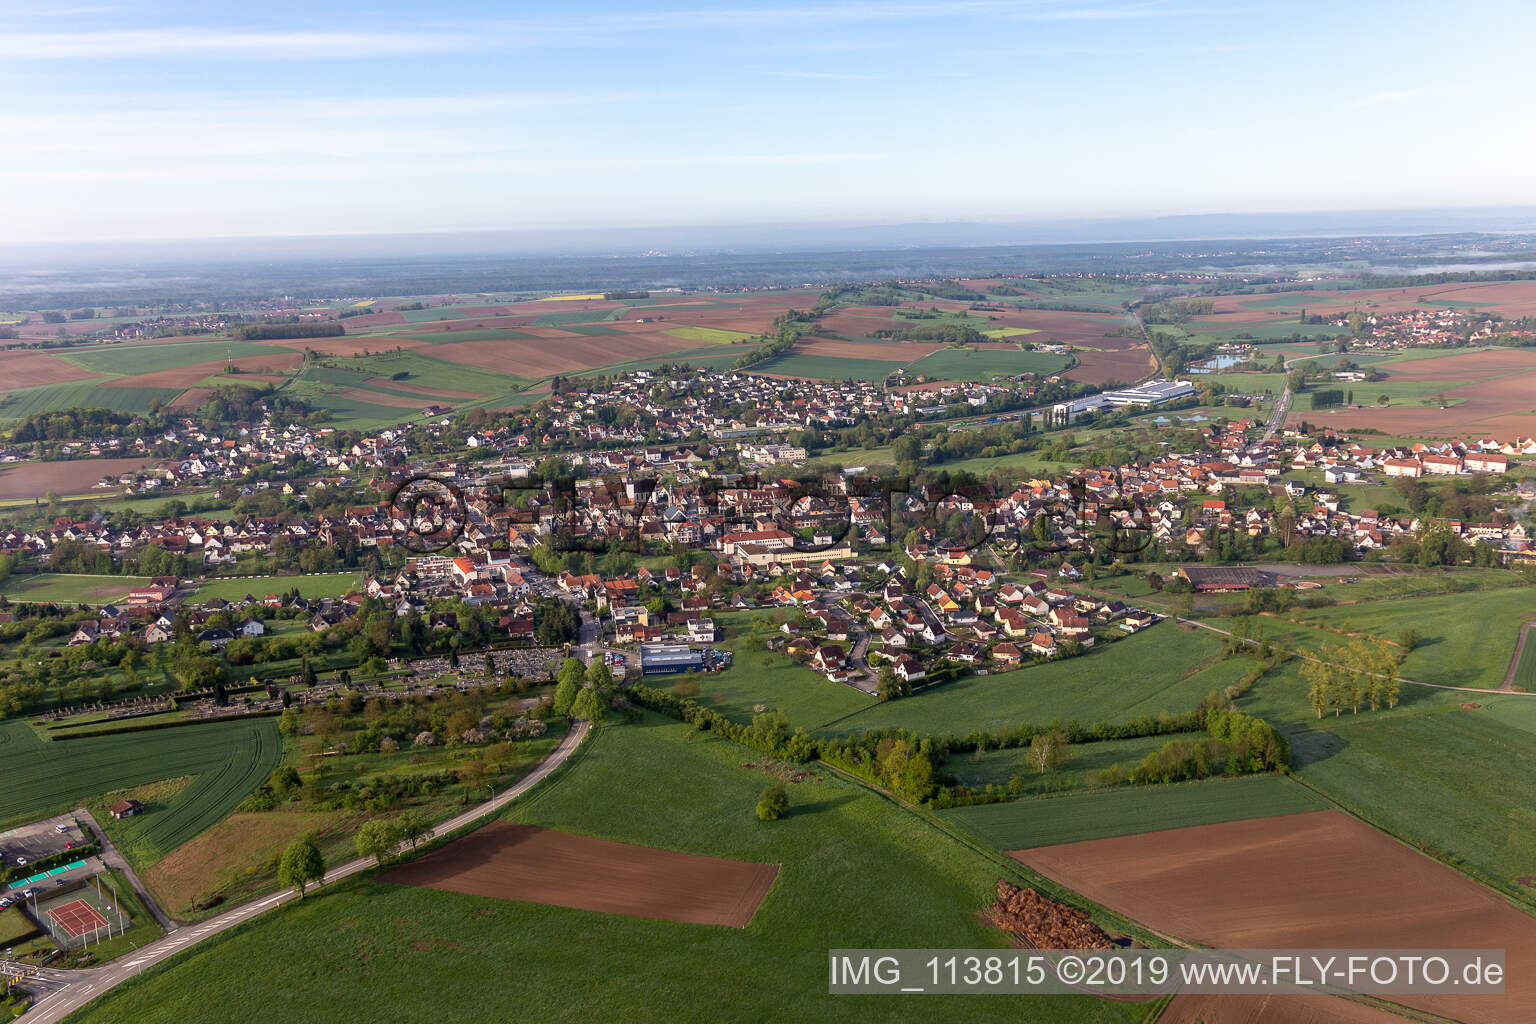 Drone image of Soultz-sous-Forêts in the state Bas-Rhin, France